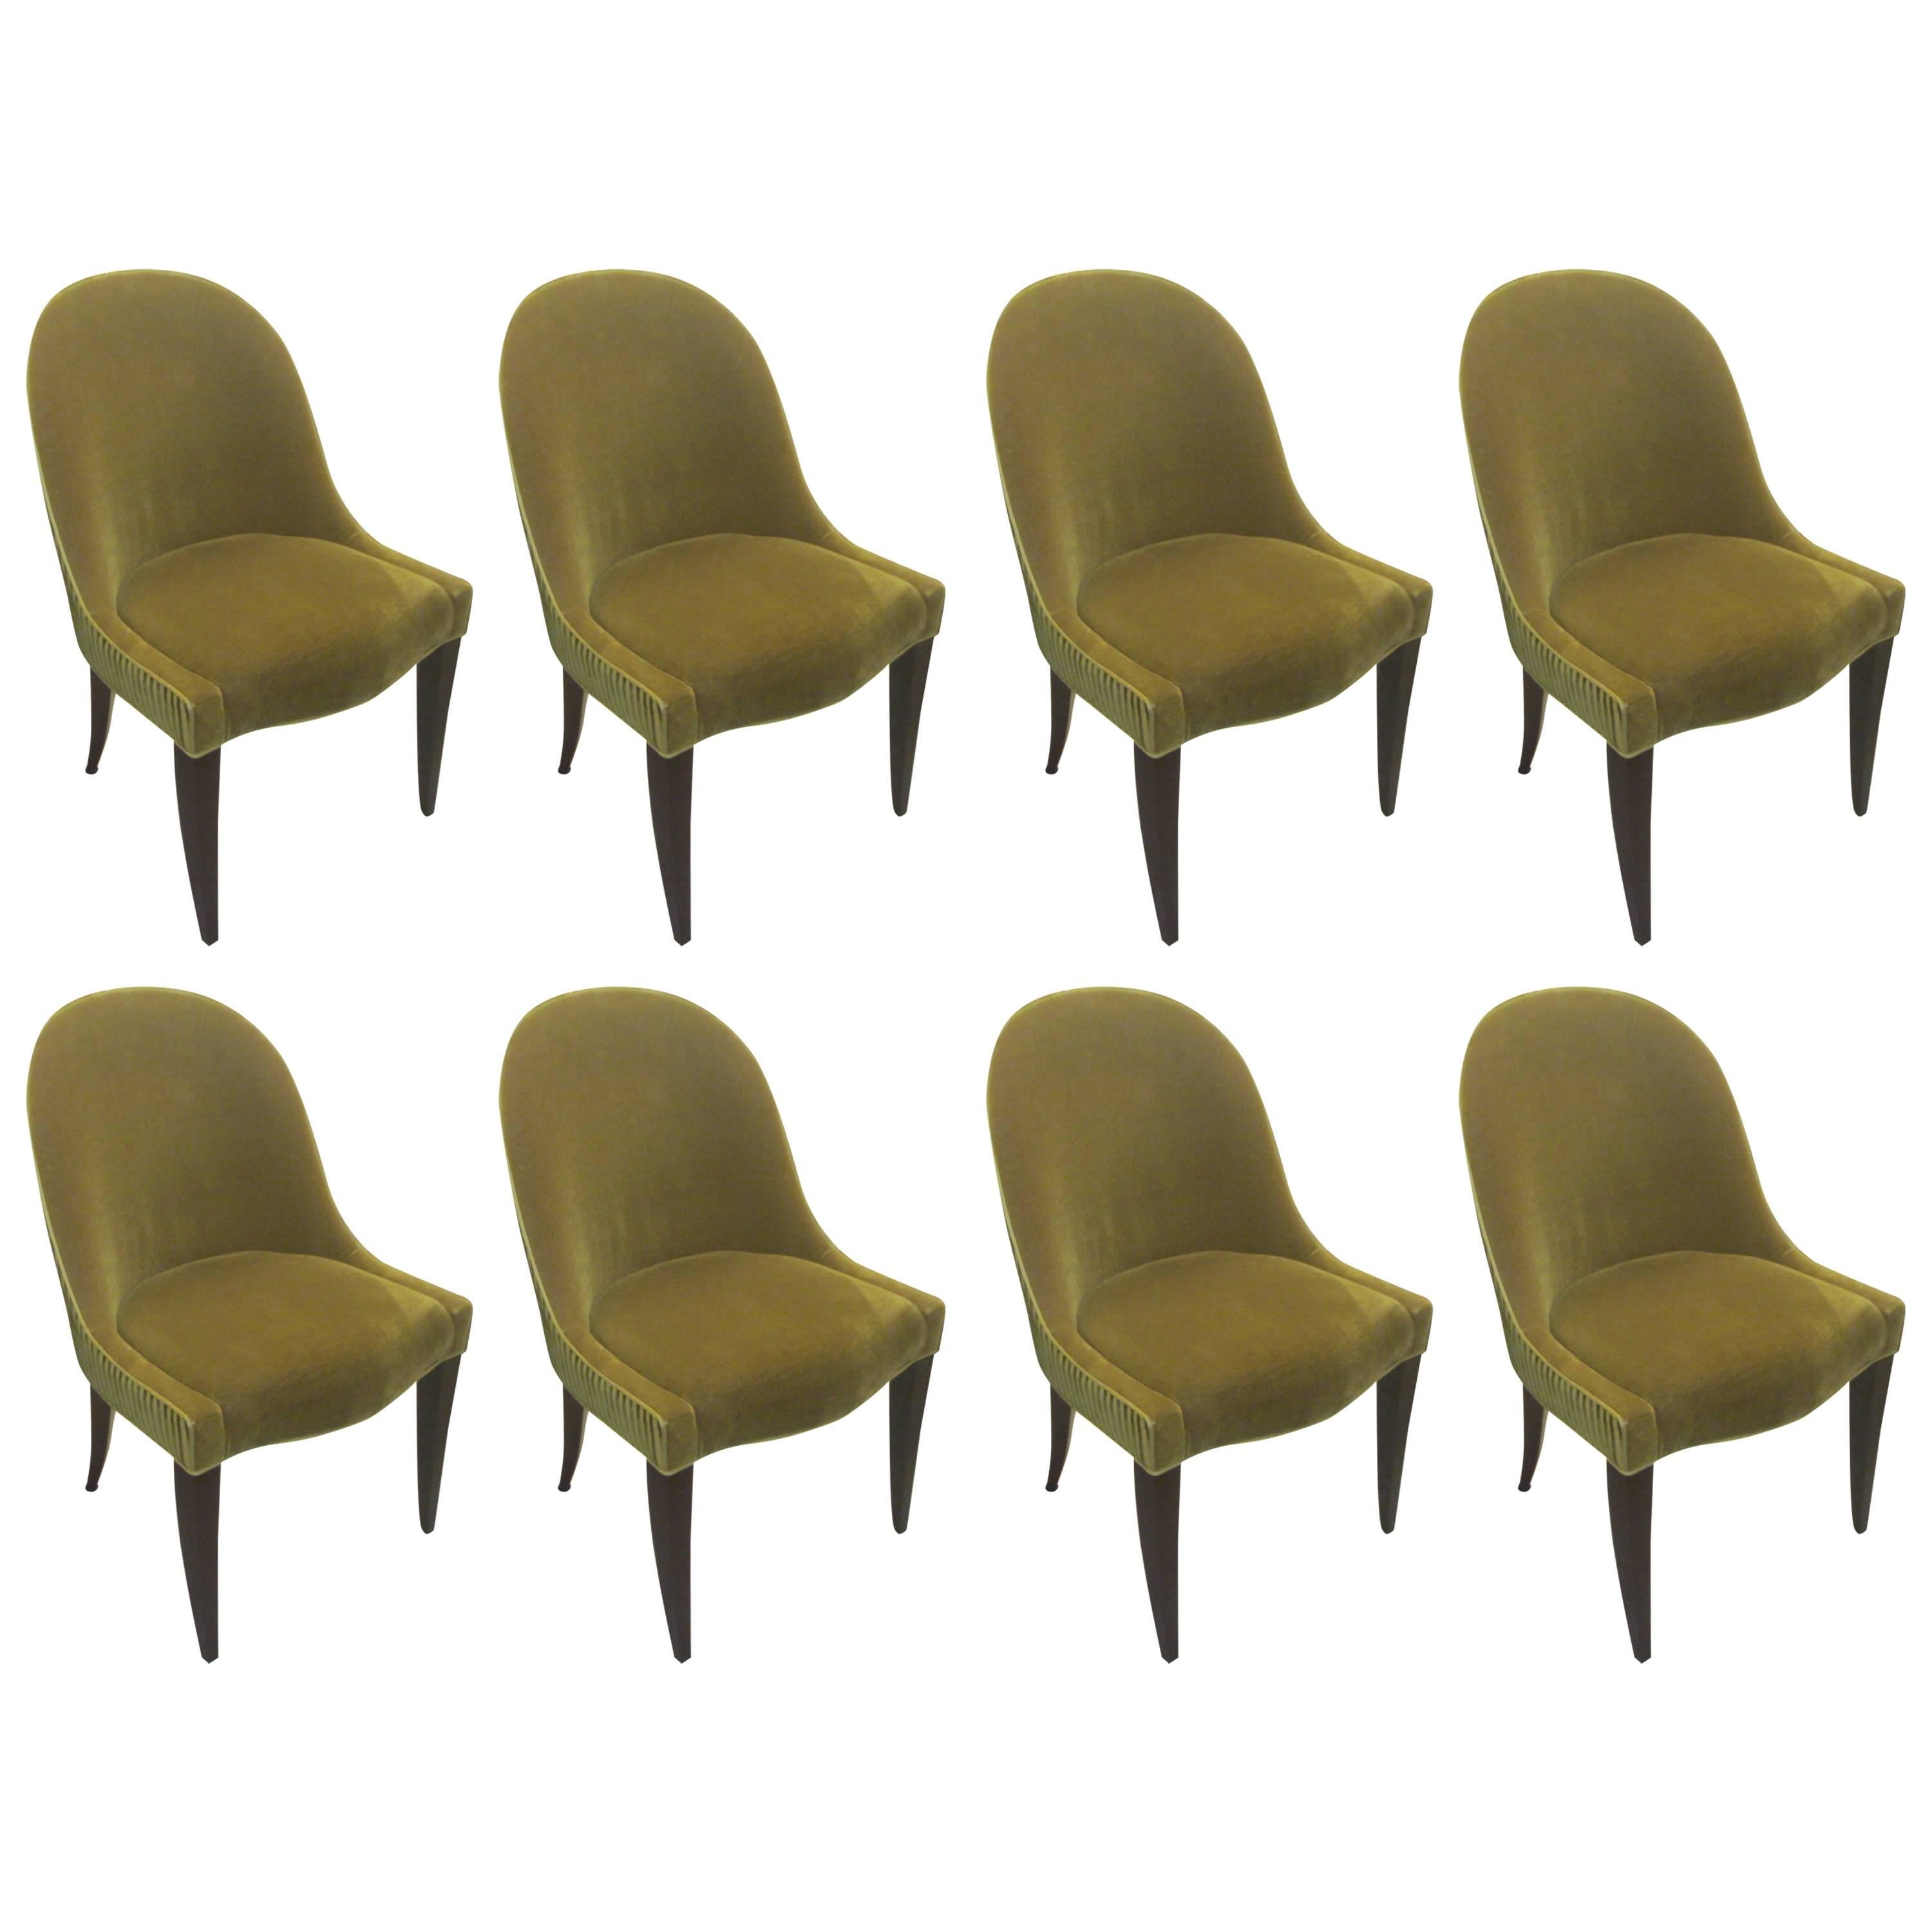 Set of Eight Dining Room Chairs with Scooped Backs Upholstered in Mohair